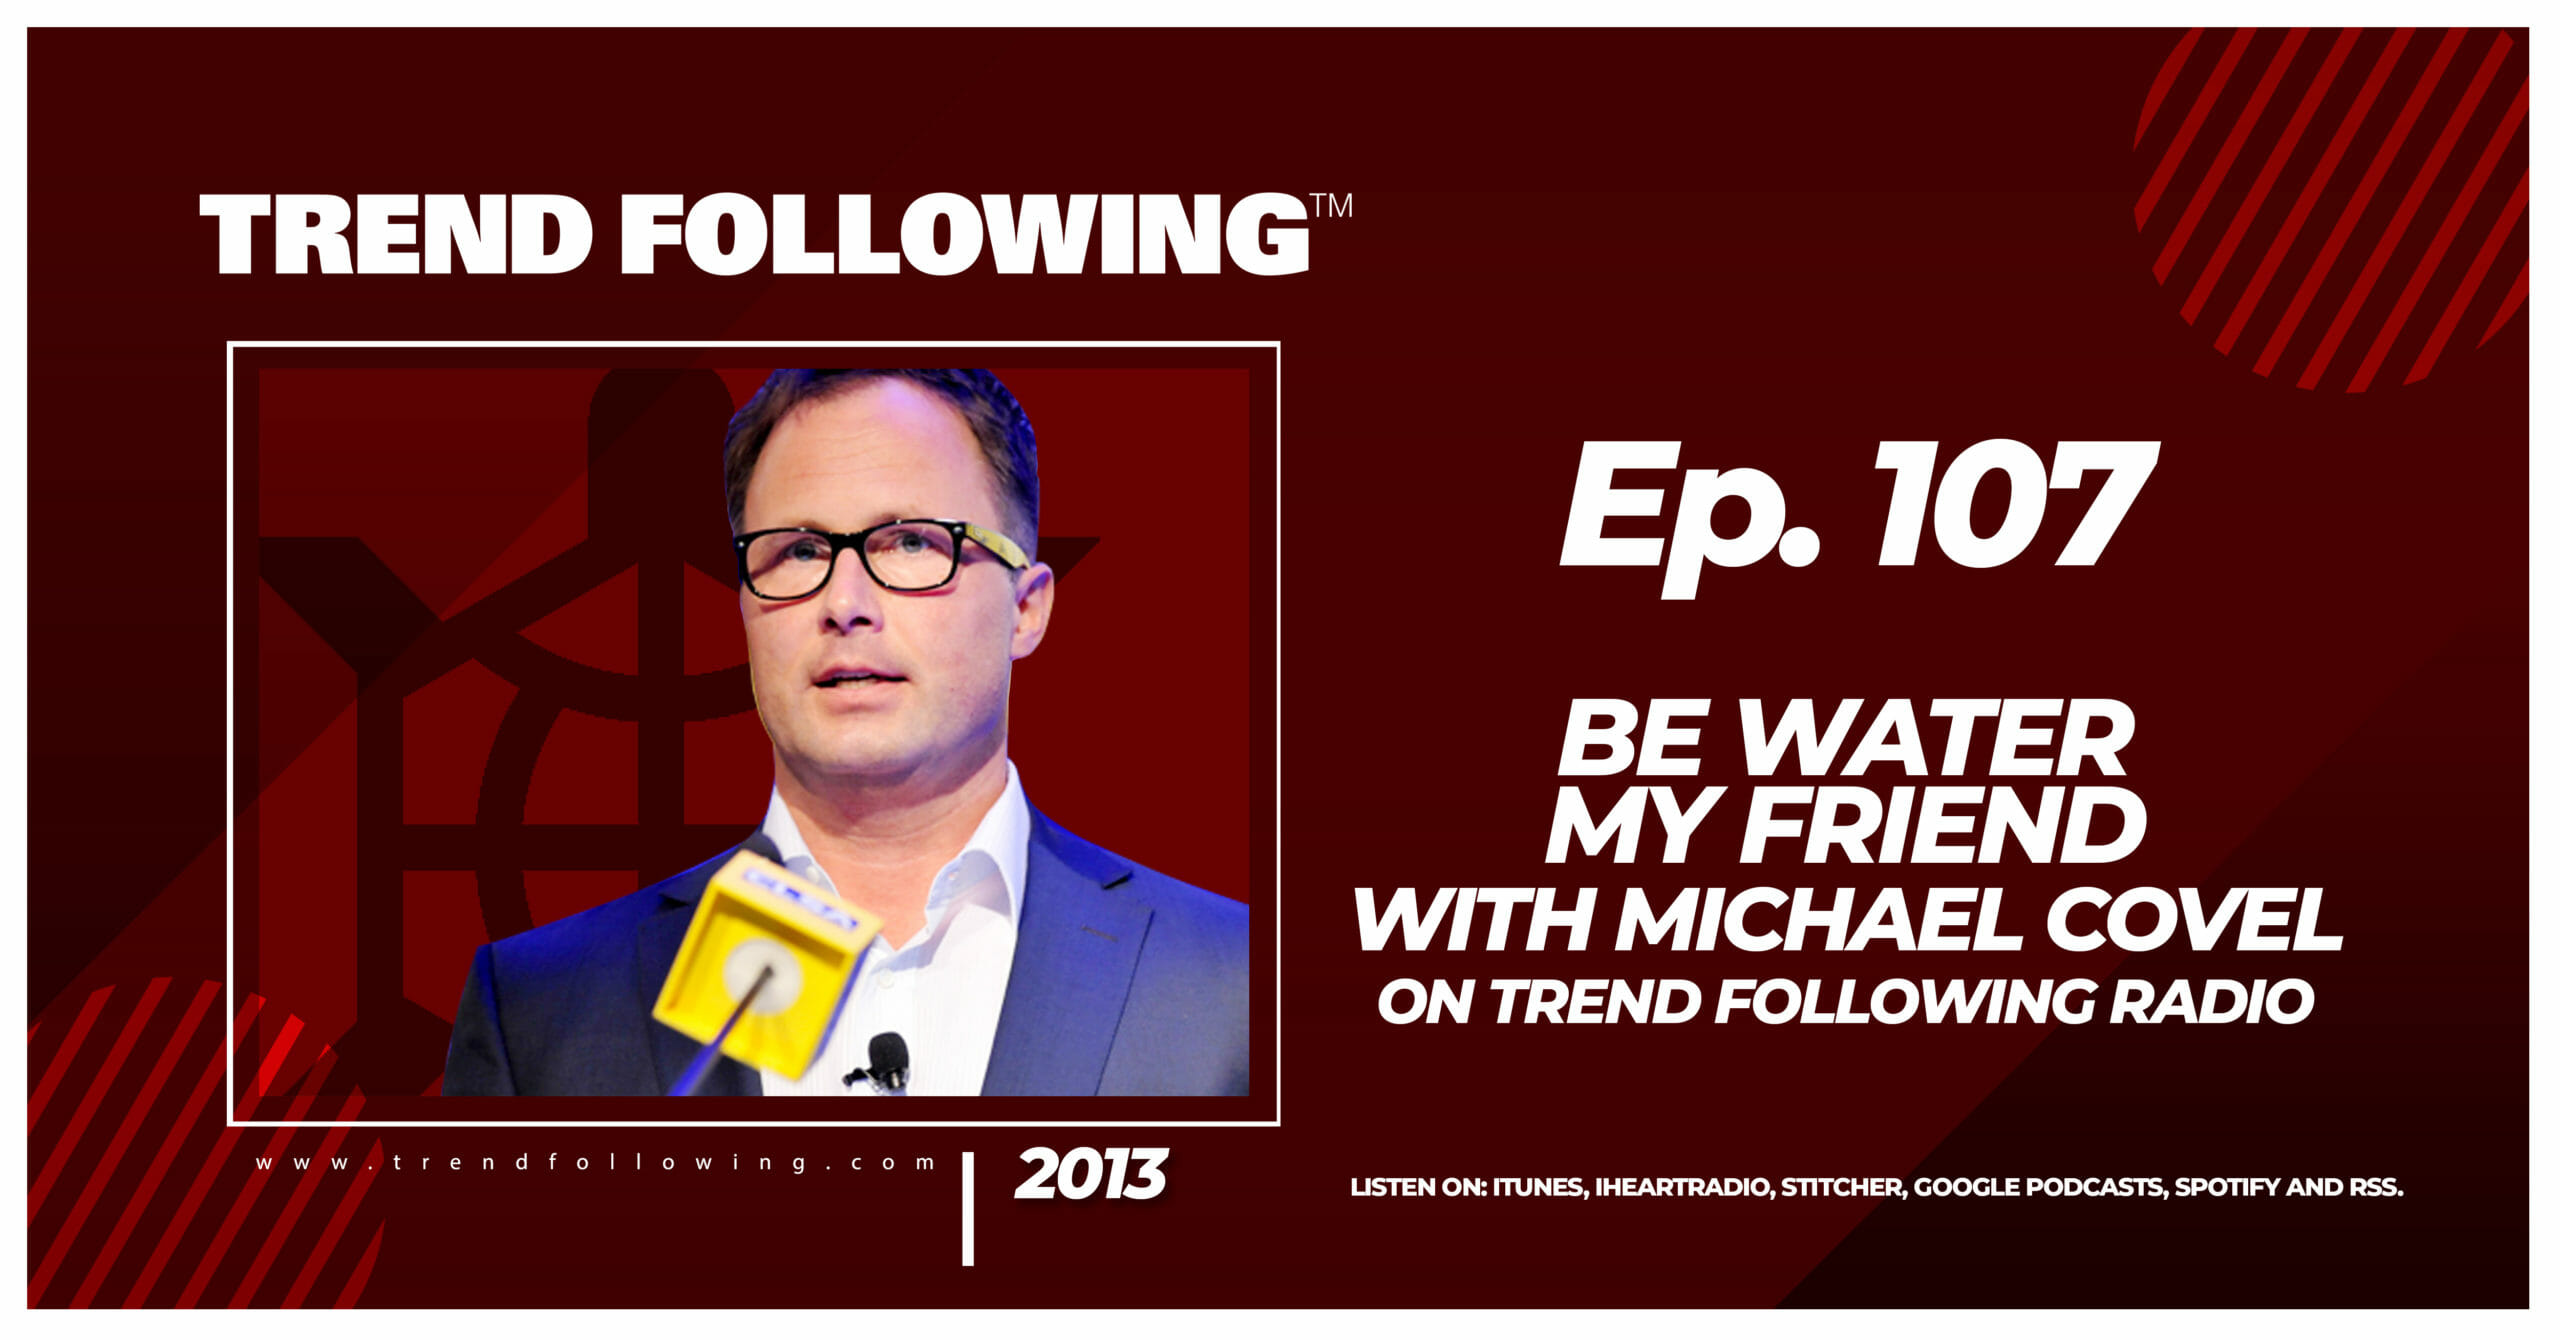 Be Water My Friend with Michael Covel on Trend Following Radio